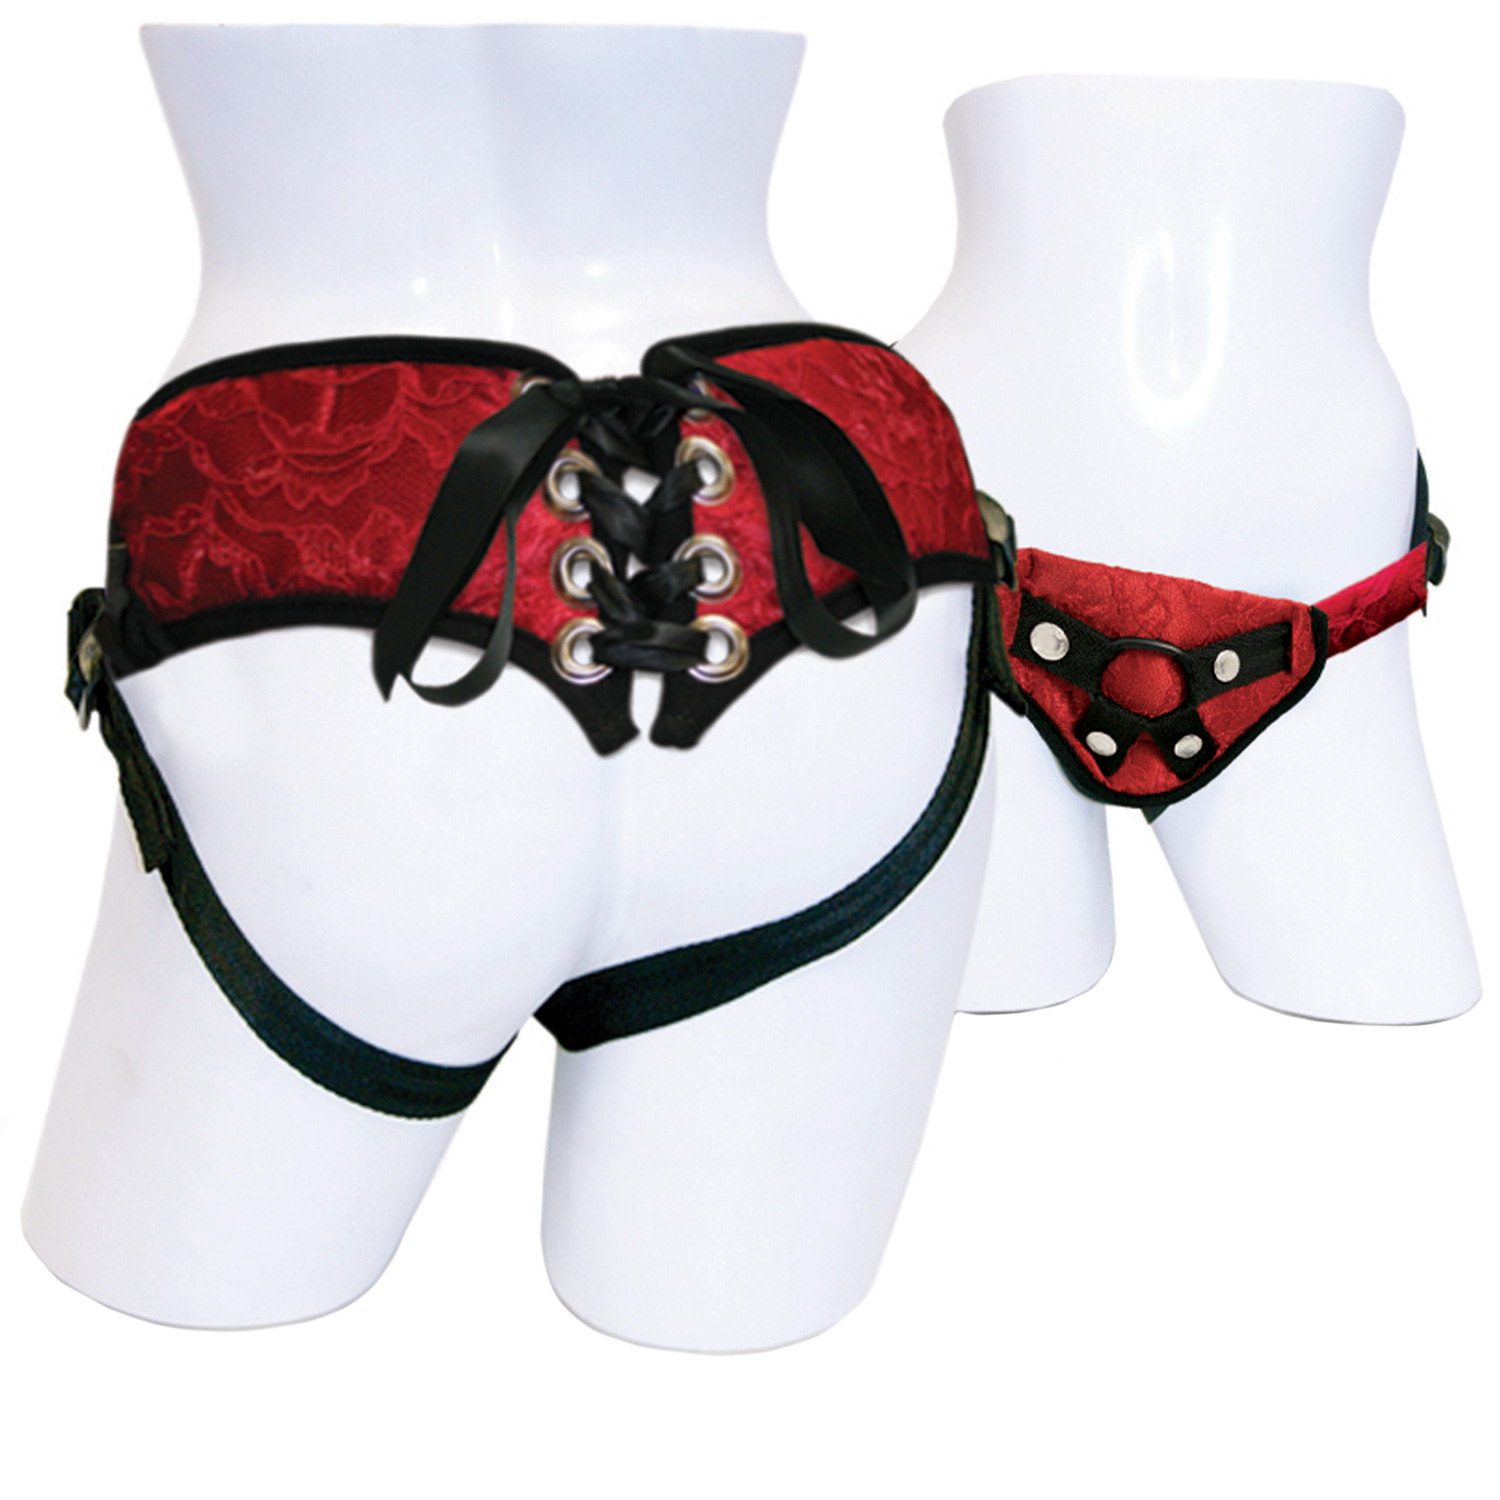 Sportsheets Red Lace Korset Strap-On Harness - Red